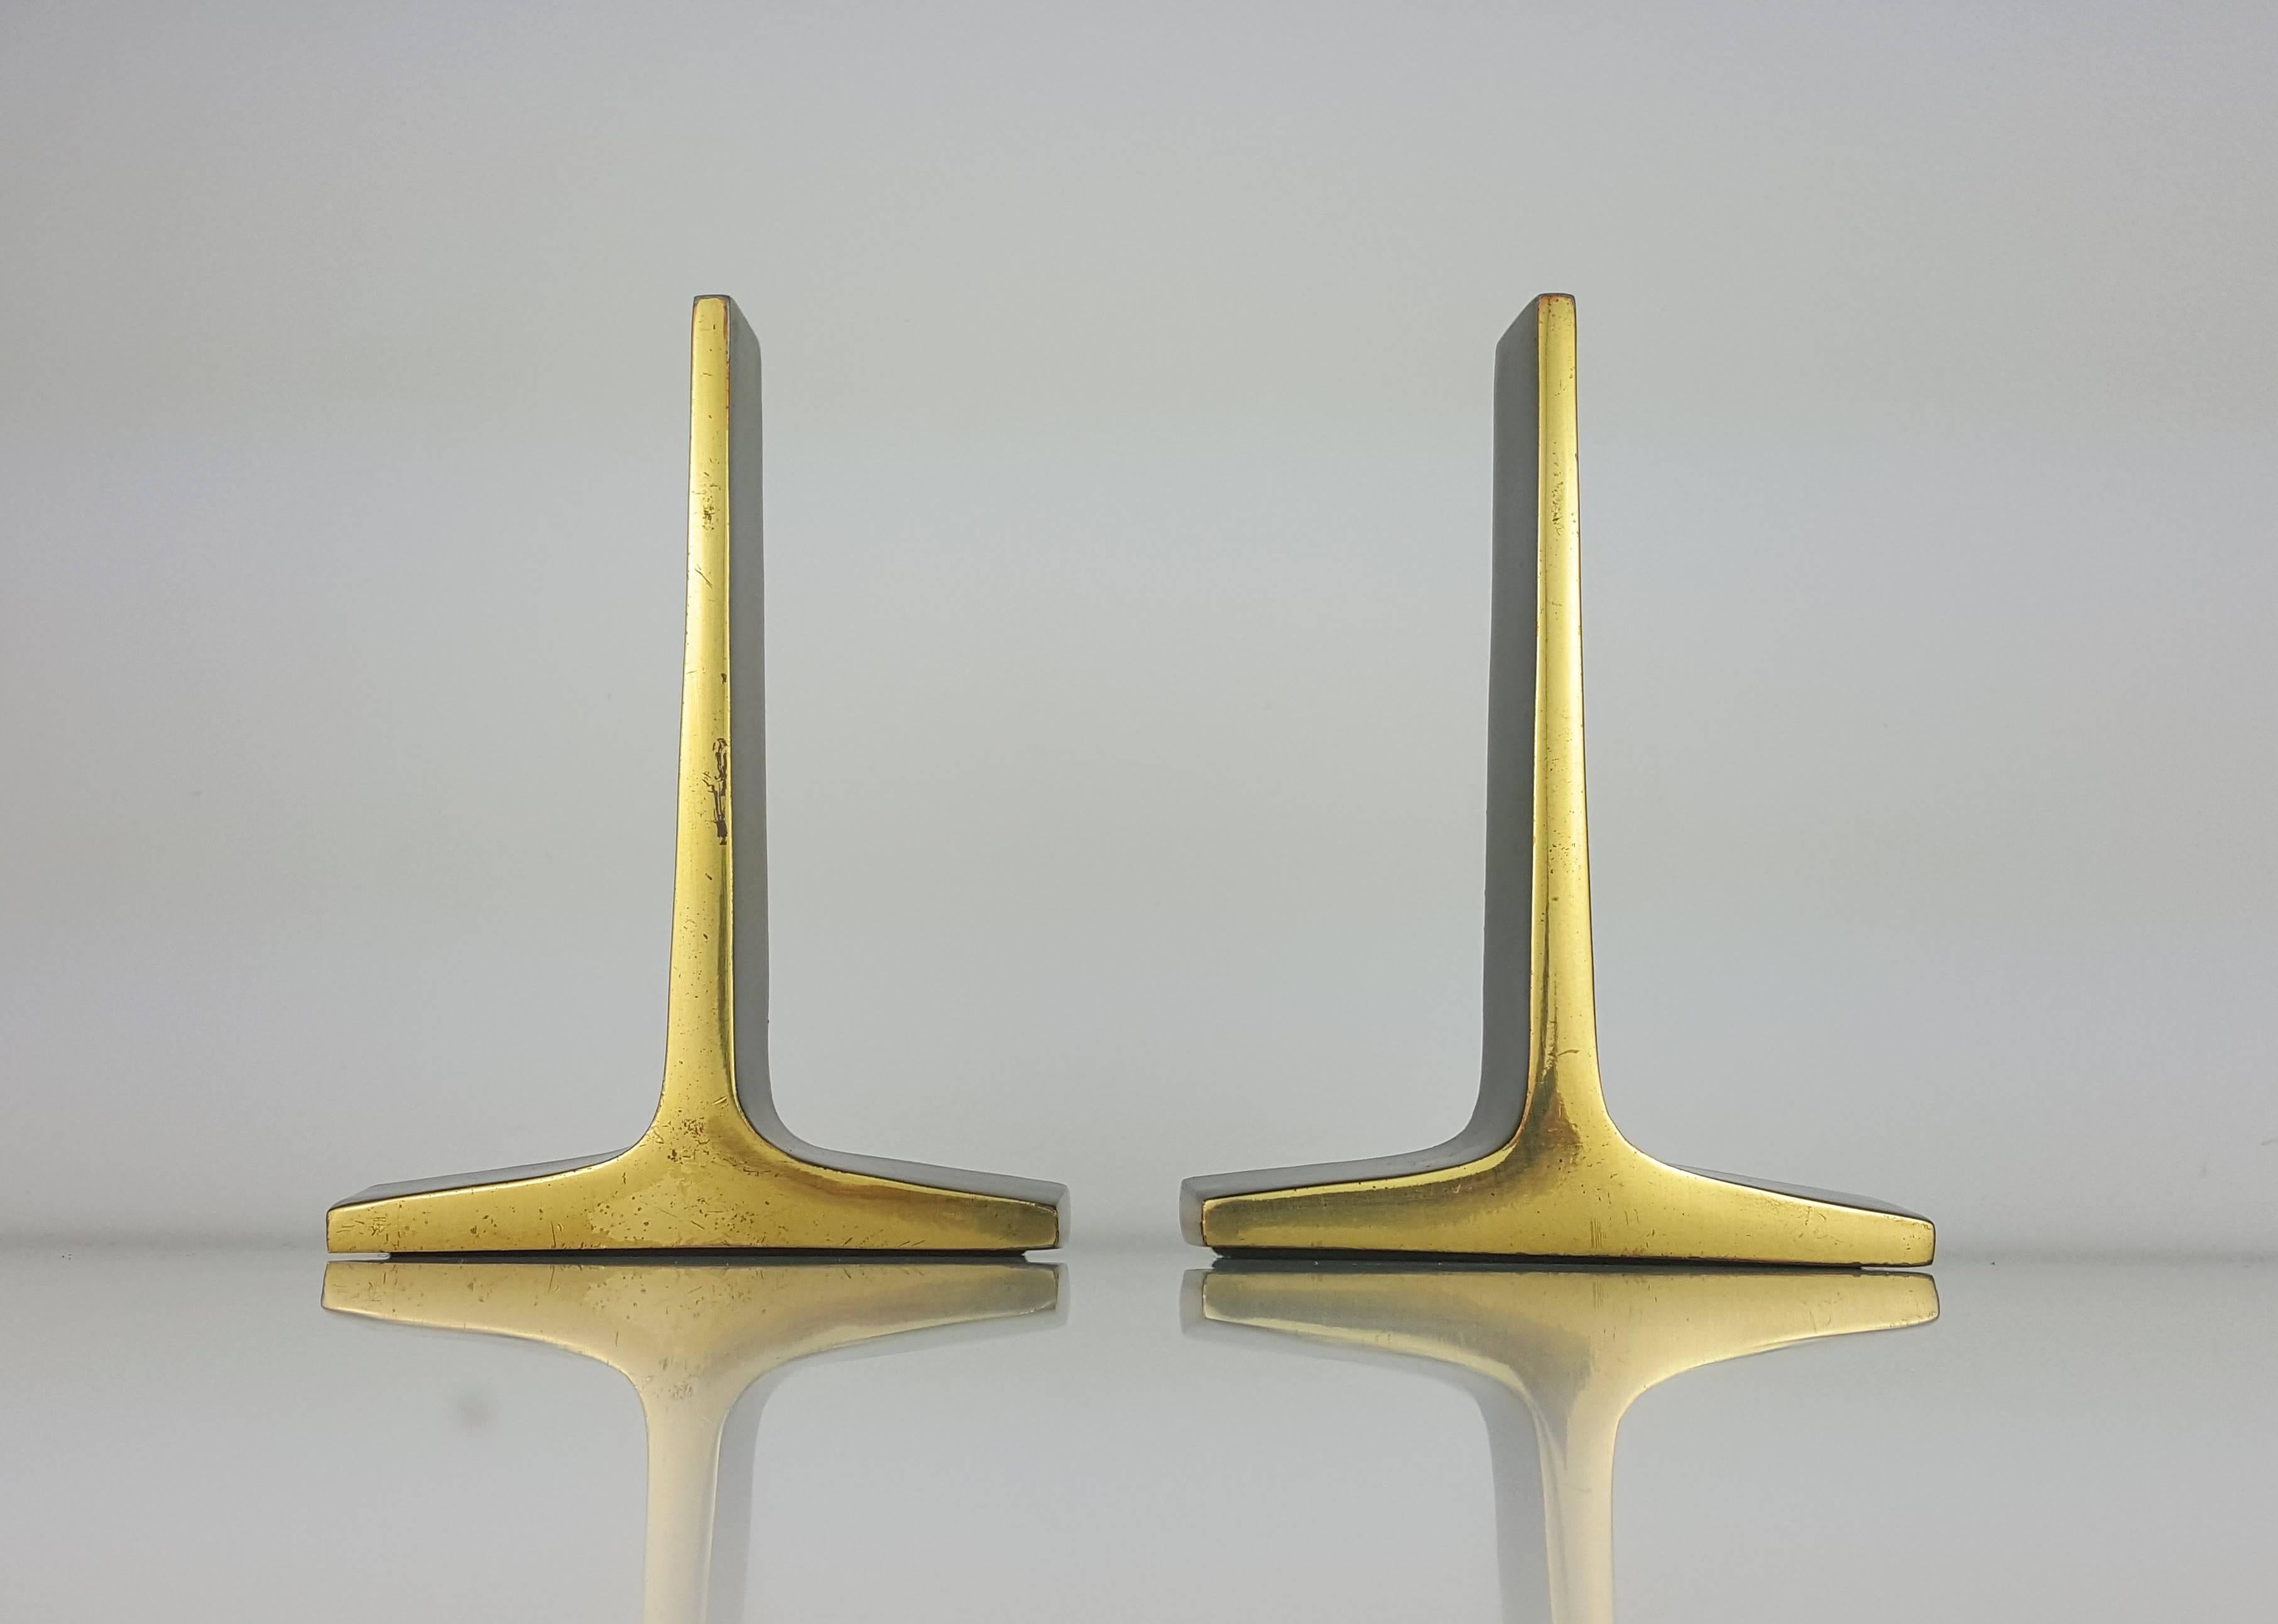 Pair of rare solid cast bronze modernist bookends by Ben Seibel. Made by Jenfredware for the 